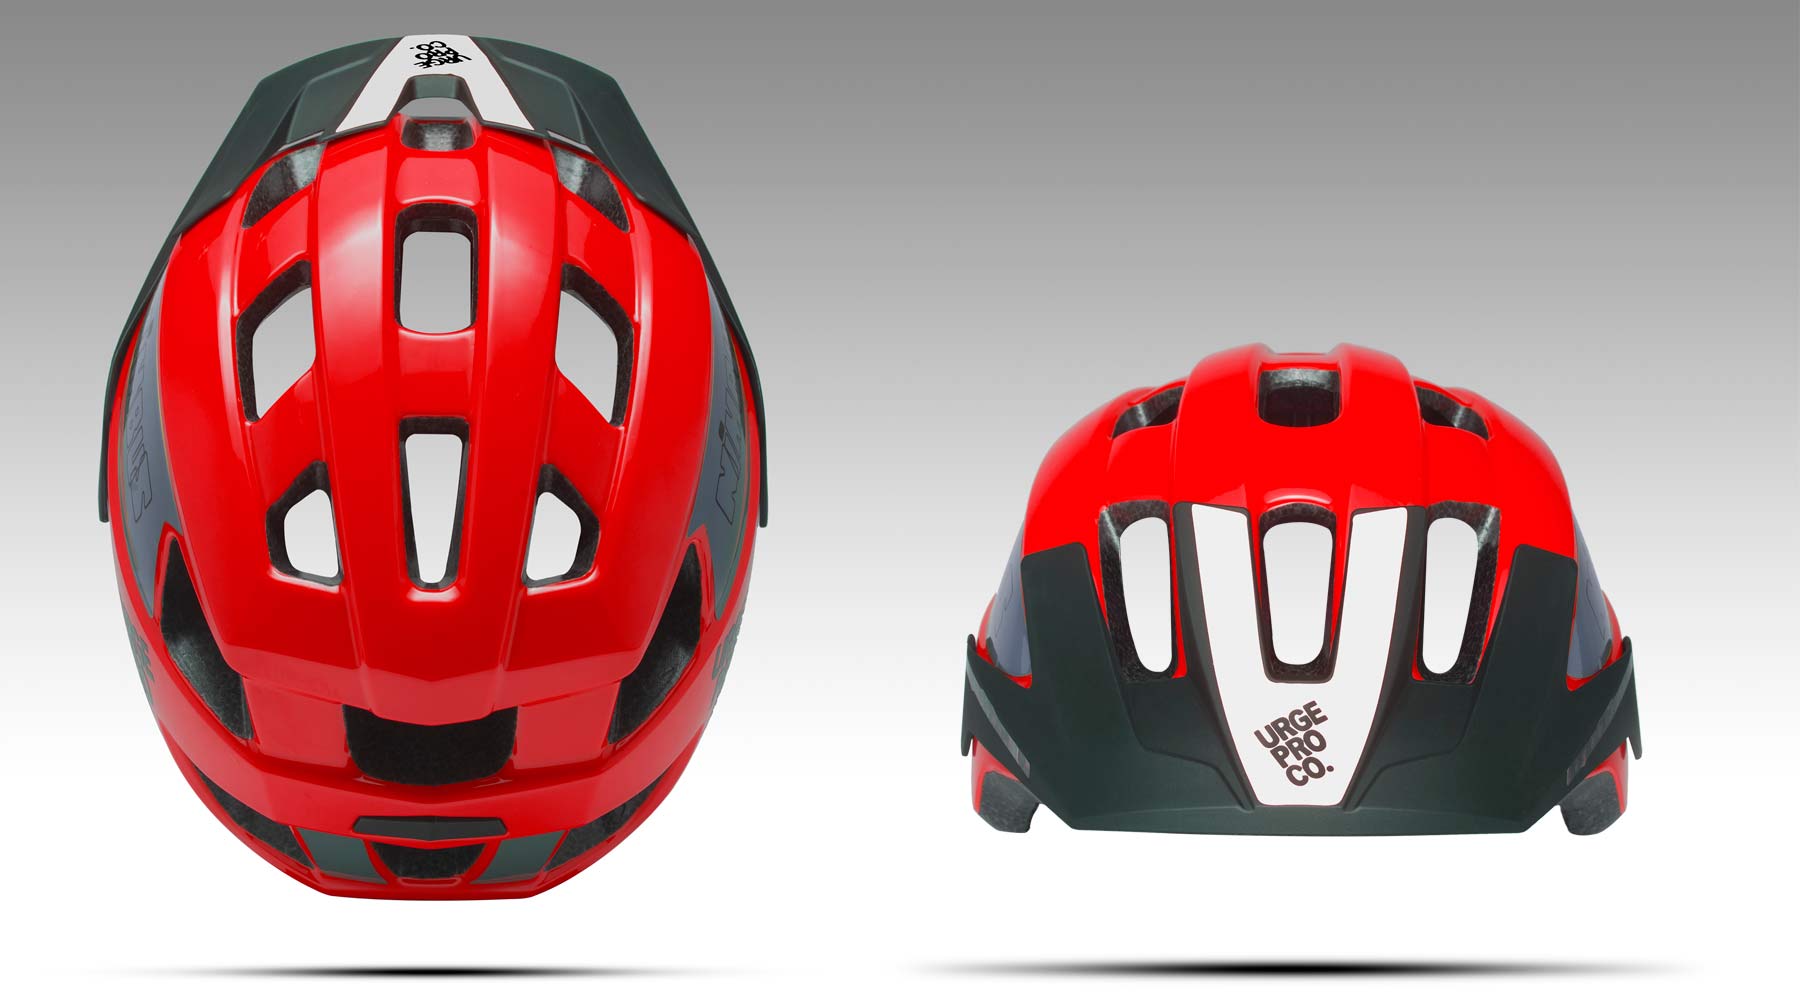 Urge Nimbus kids MTB helmet, affordable child-sized eco-friendly all-trail all-mountain bike head protection, top details